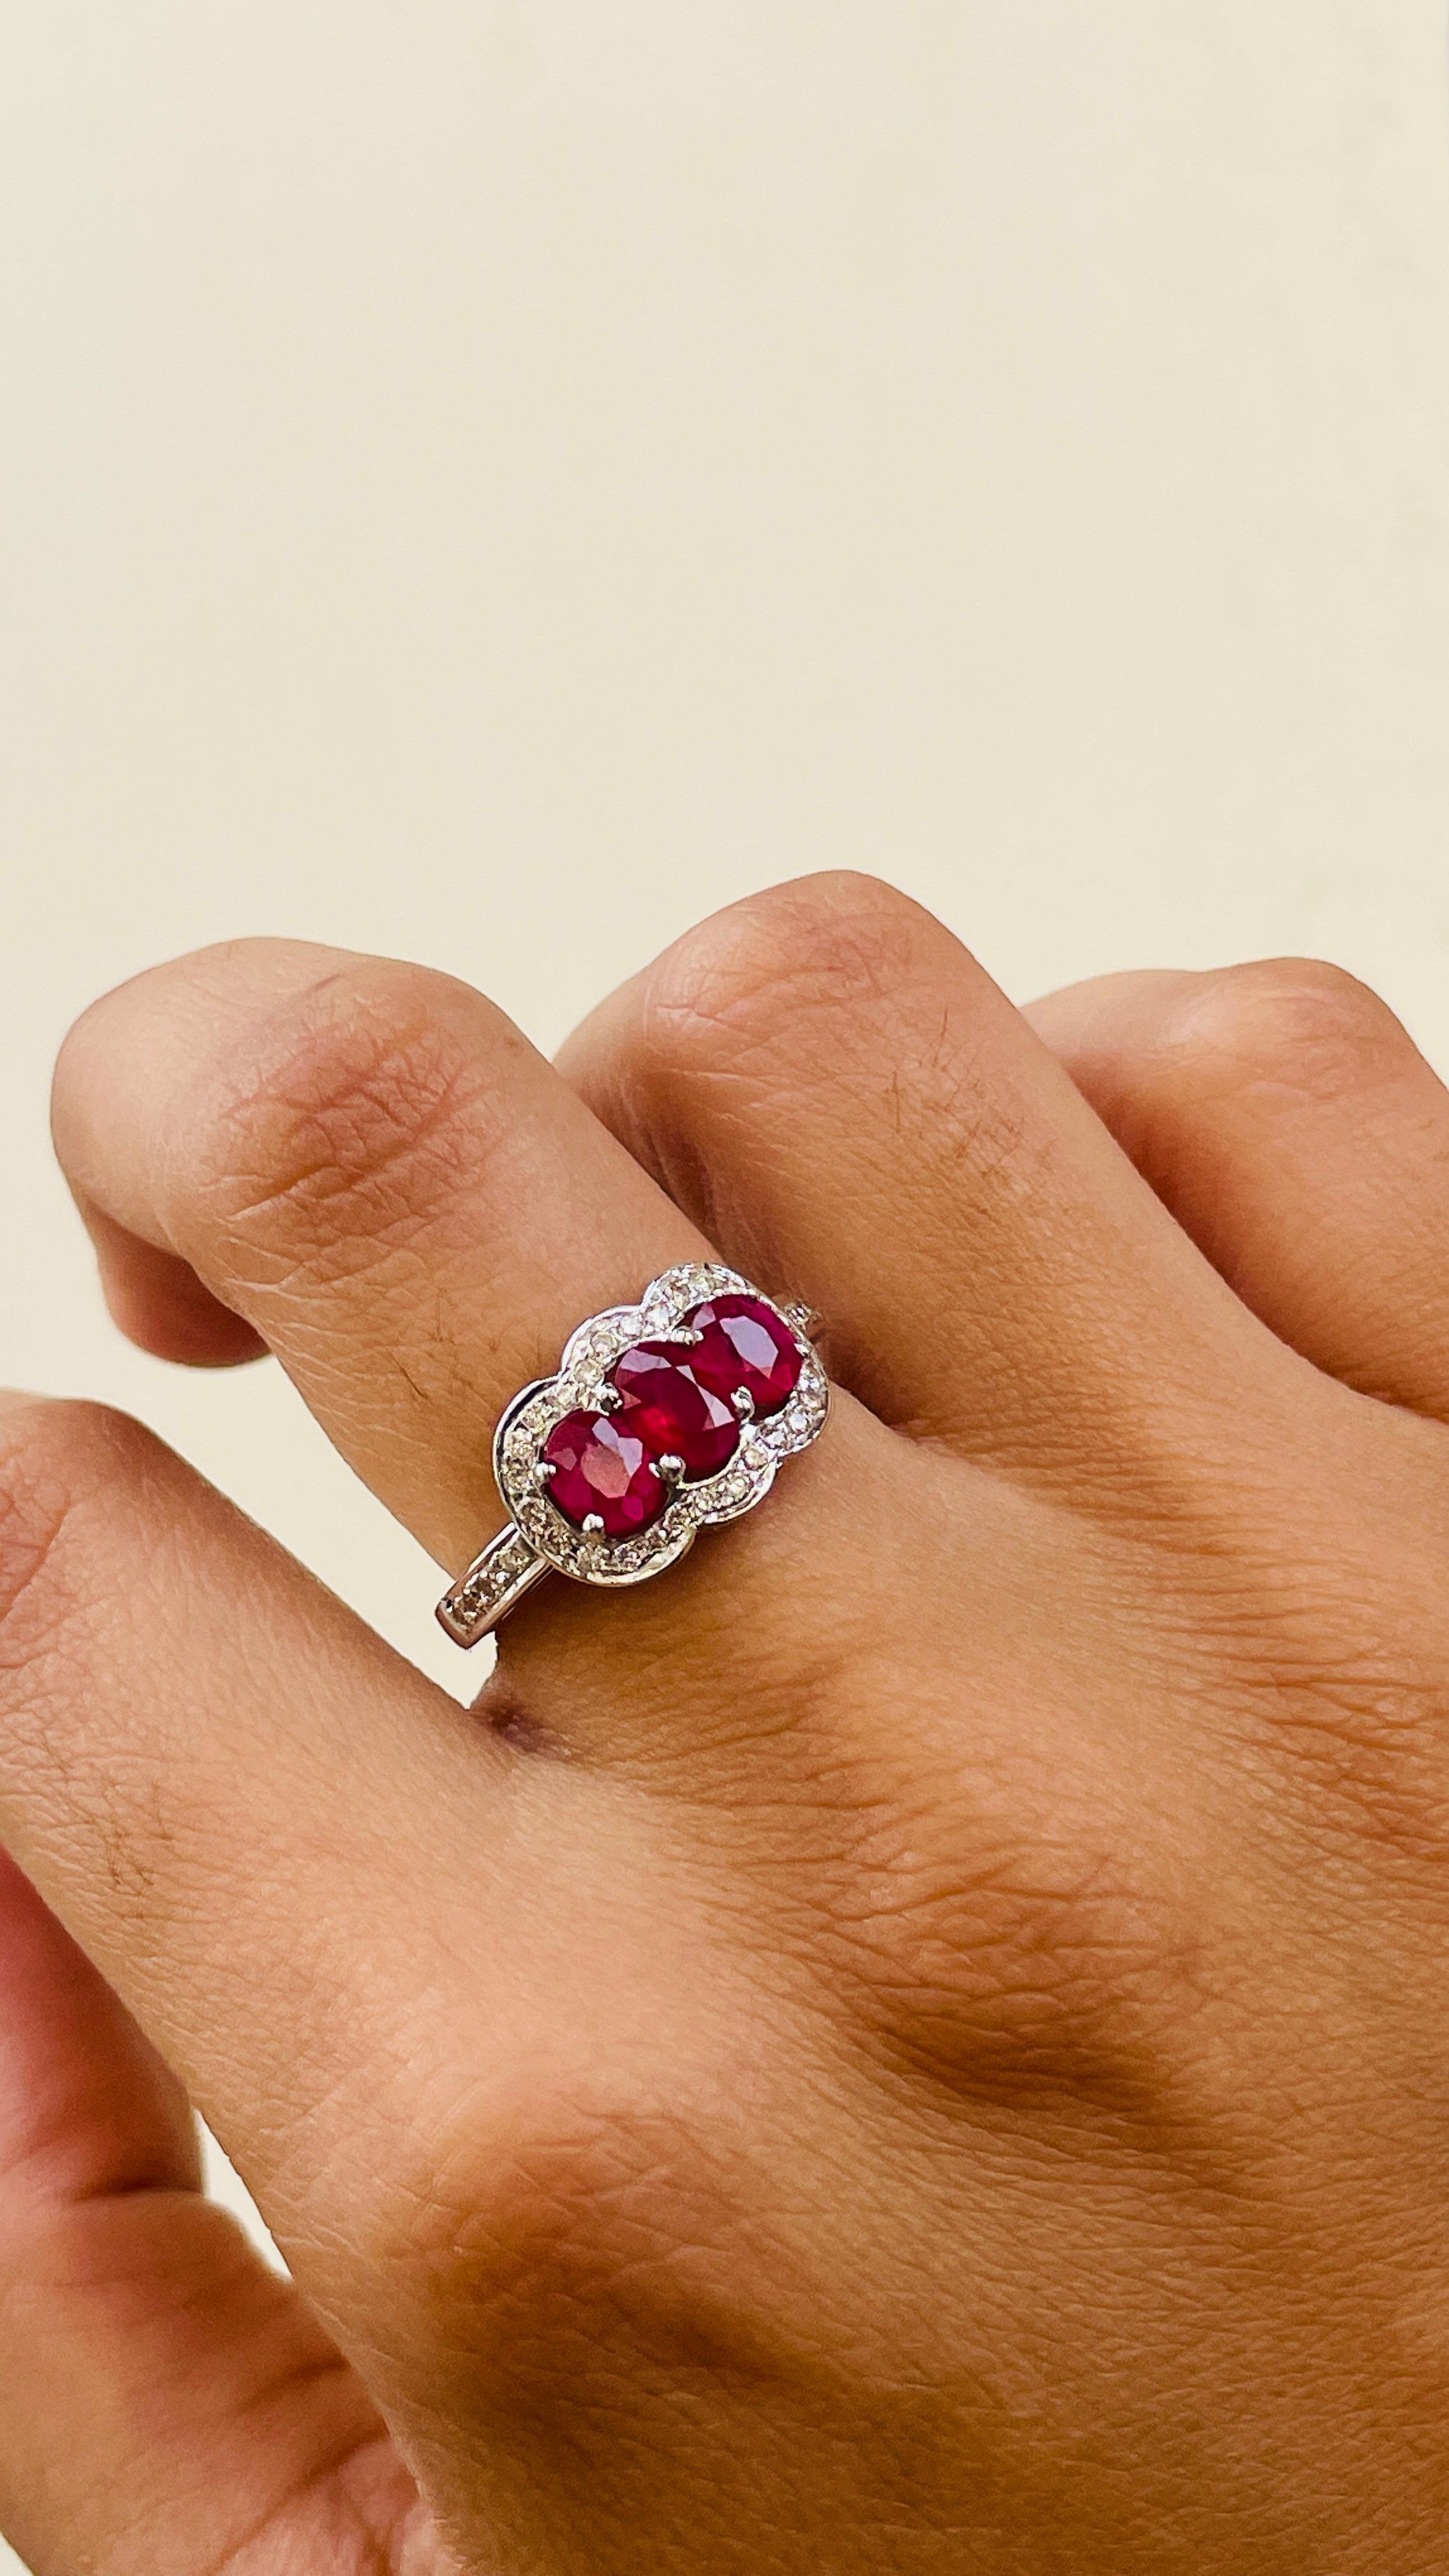 For Sale:  Oval Cut Three Stone Ruby Engagement Ring in 18K White Gold with Diamonds 6